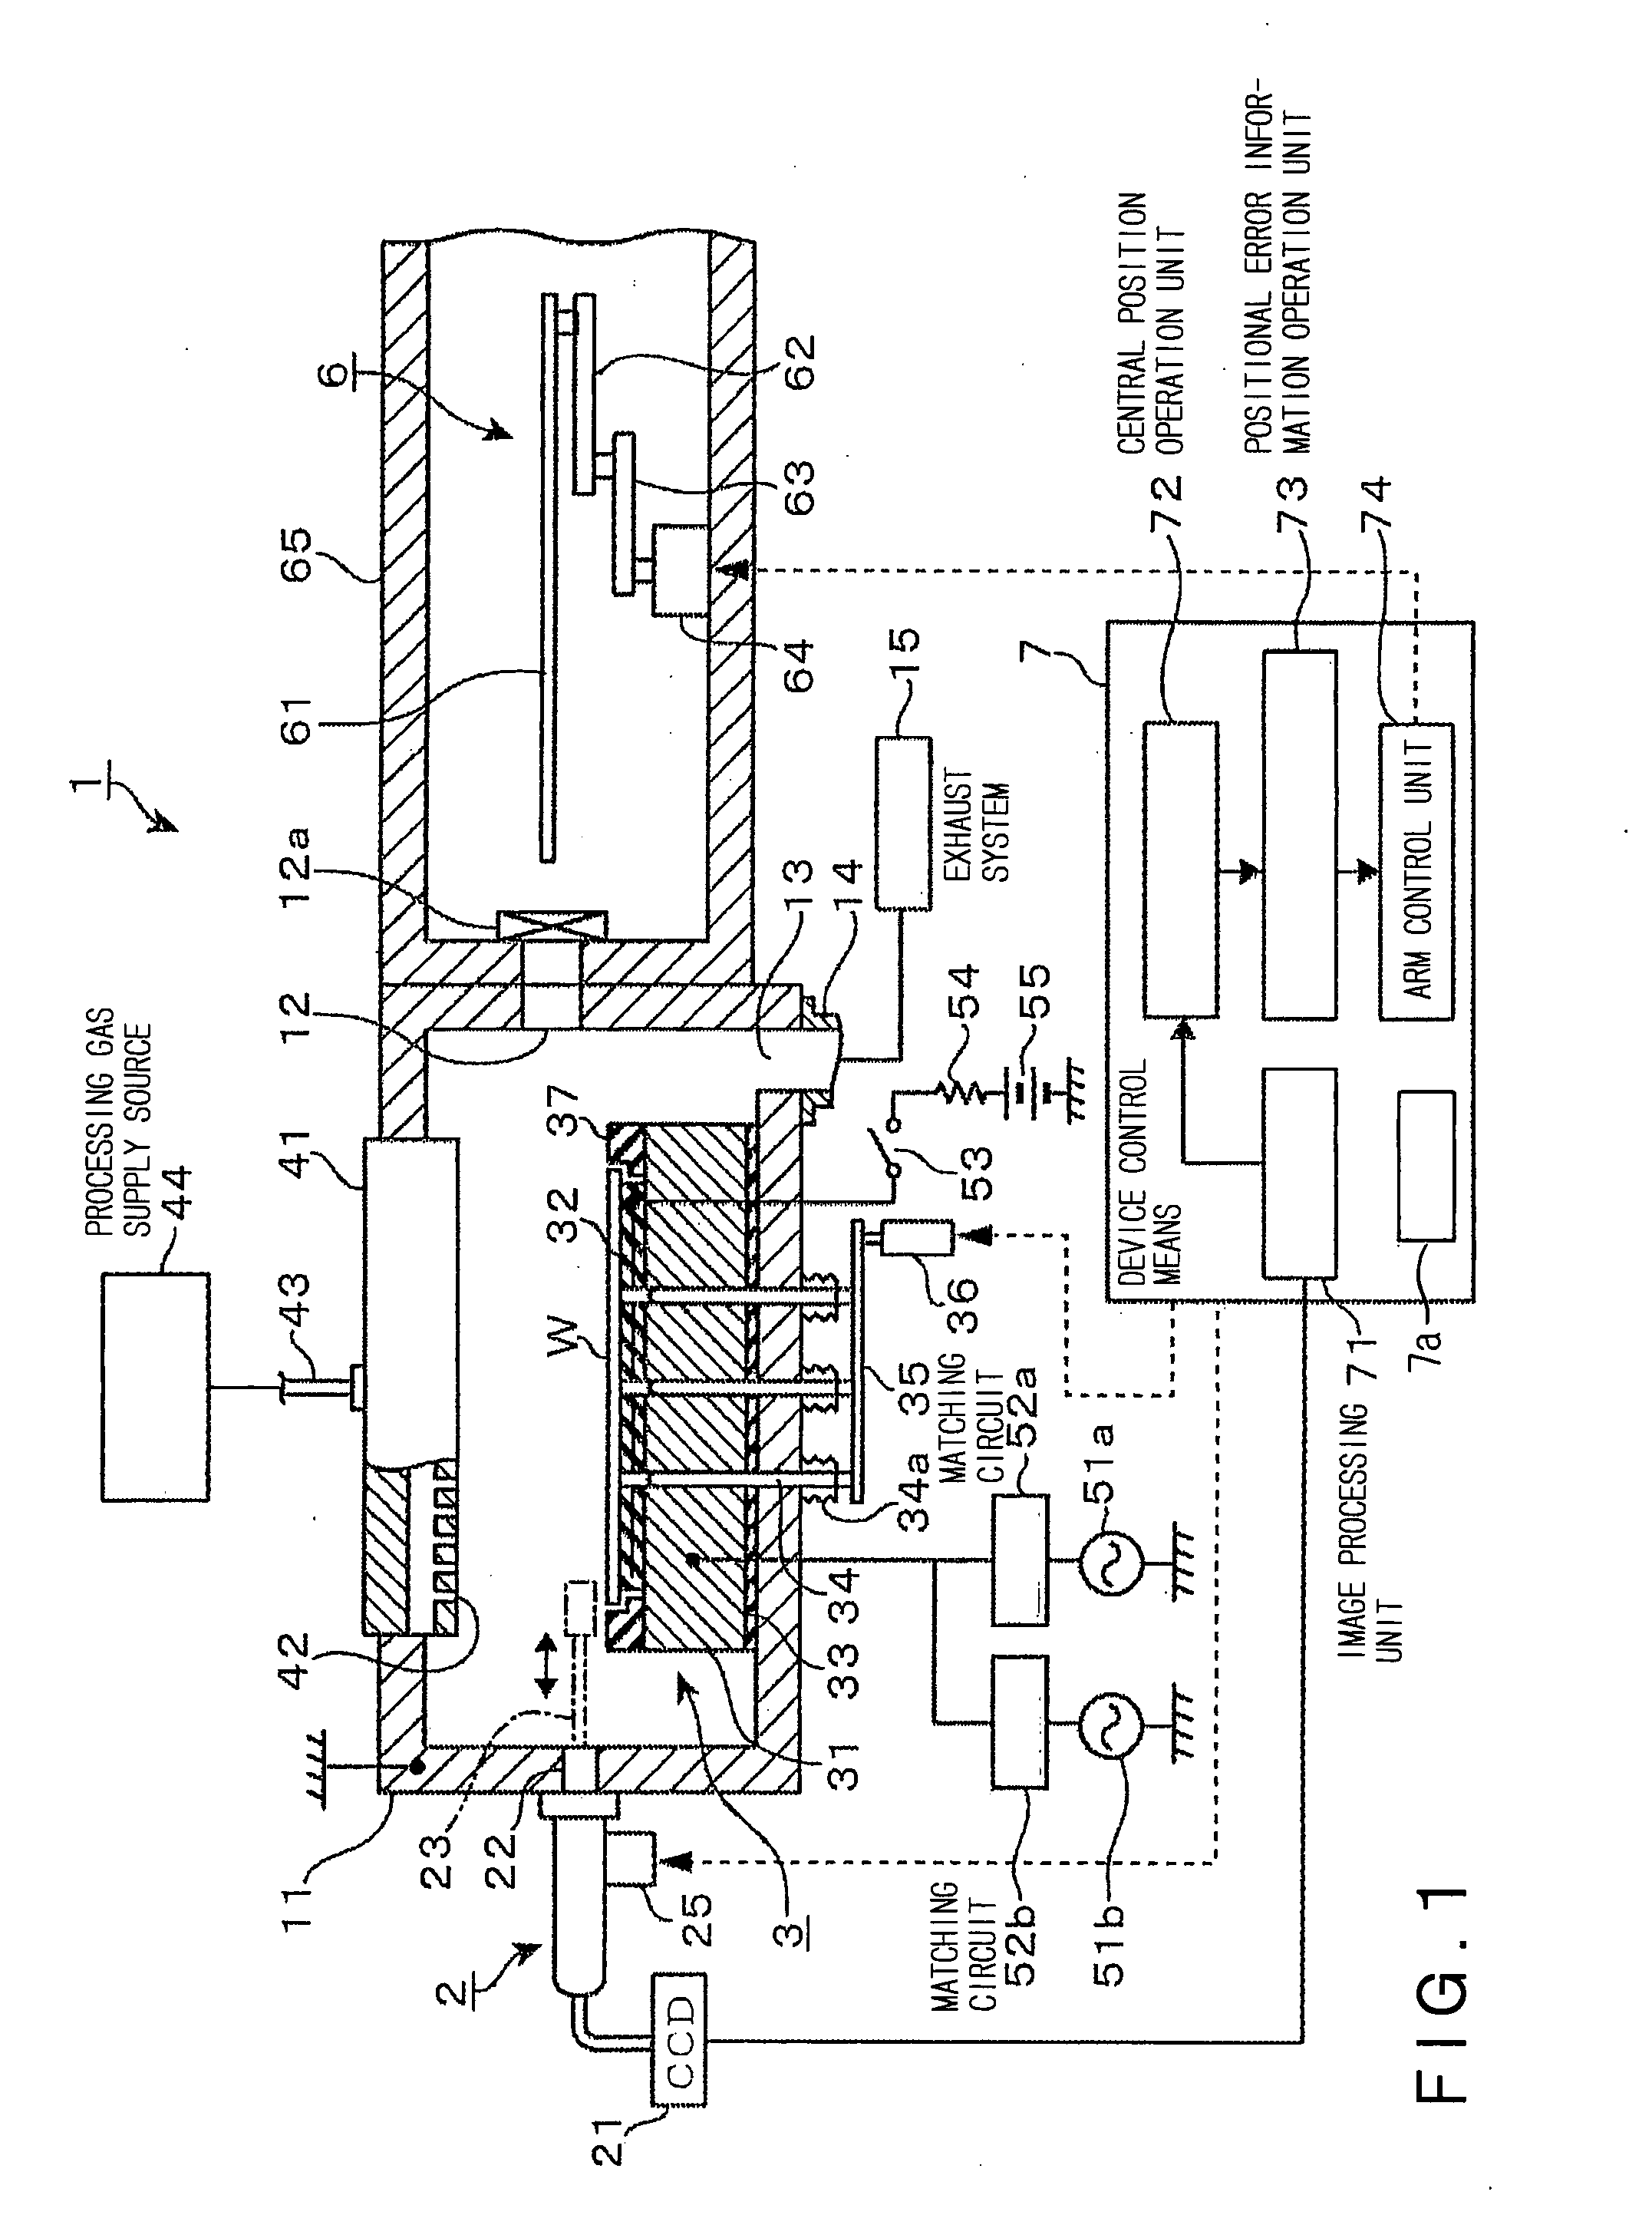 Substrate processing apparatus, substrate processing method, computer program, and storage medium